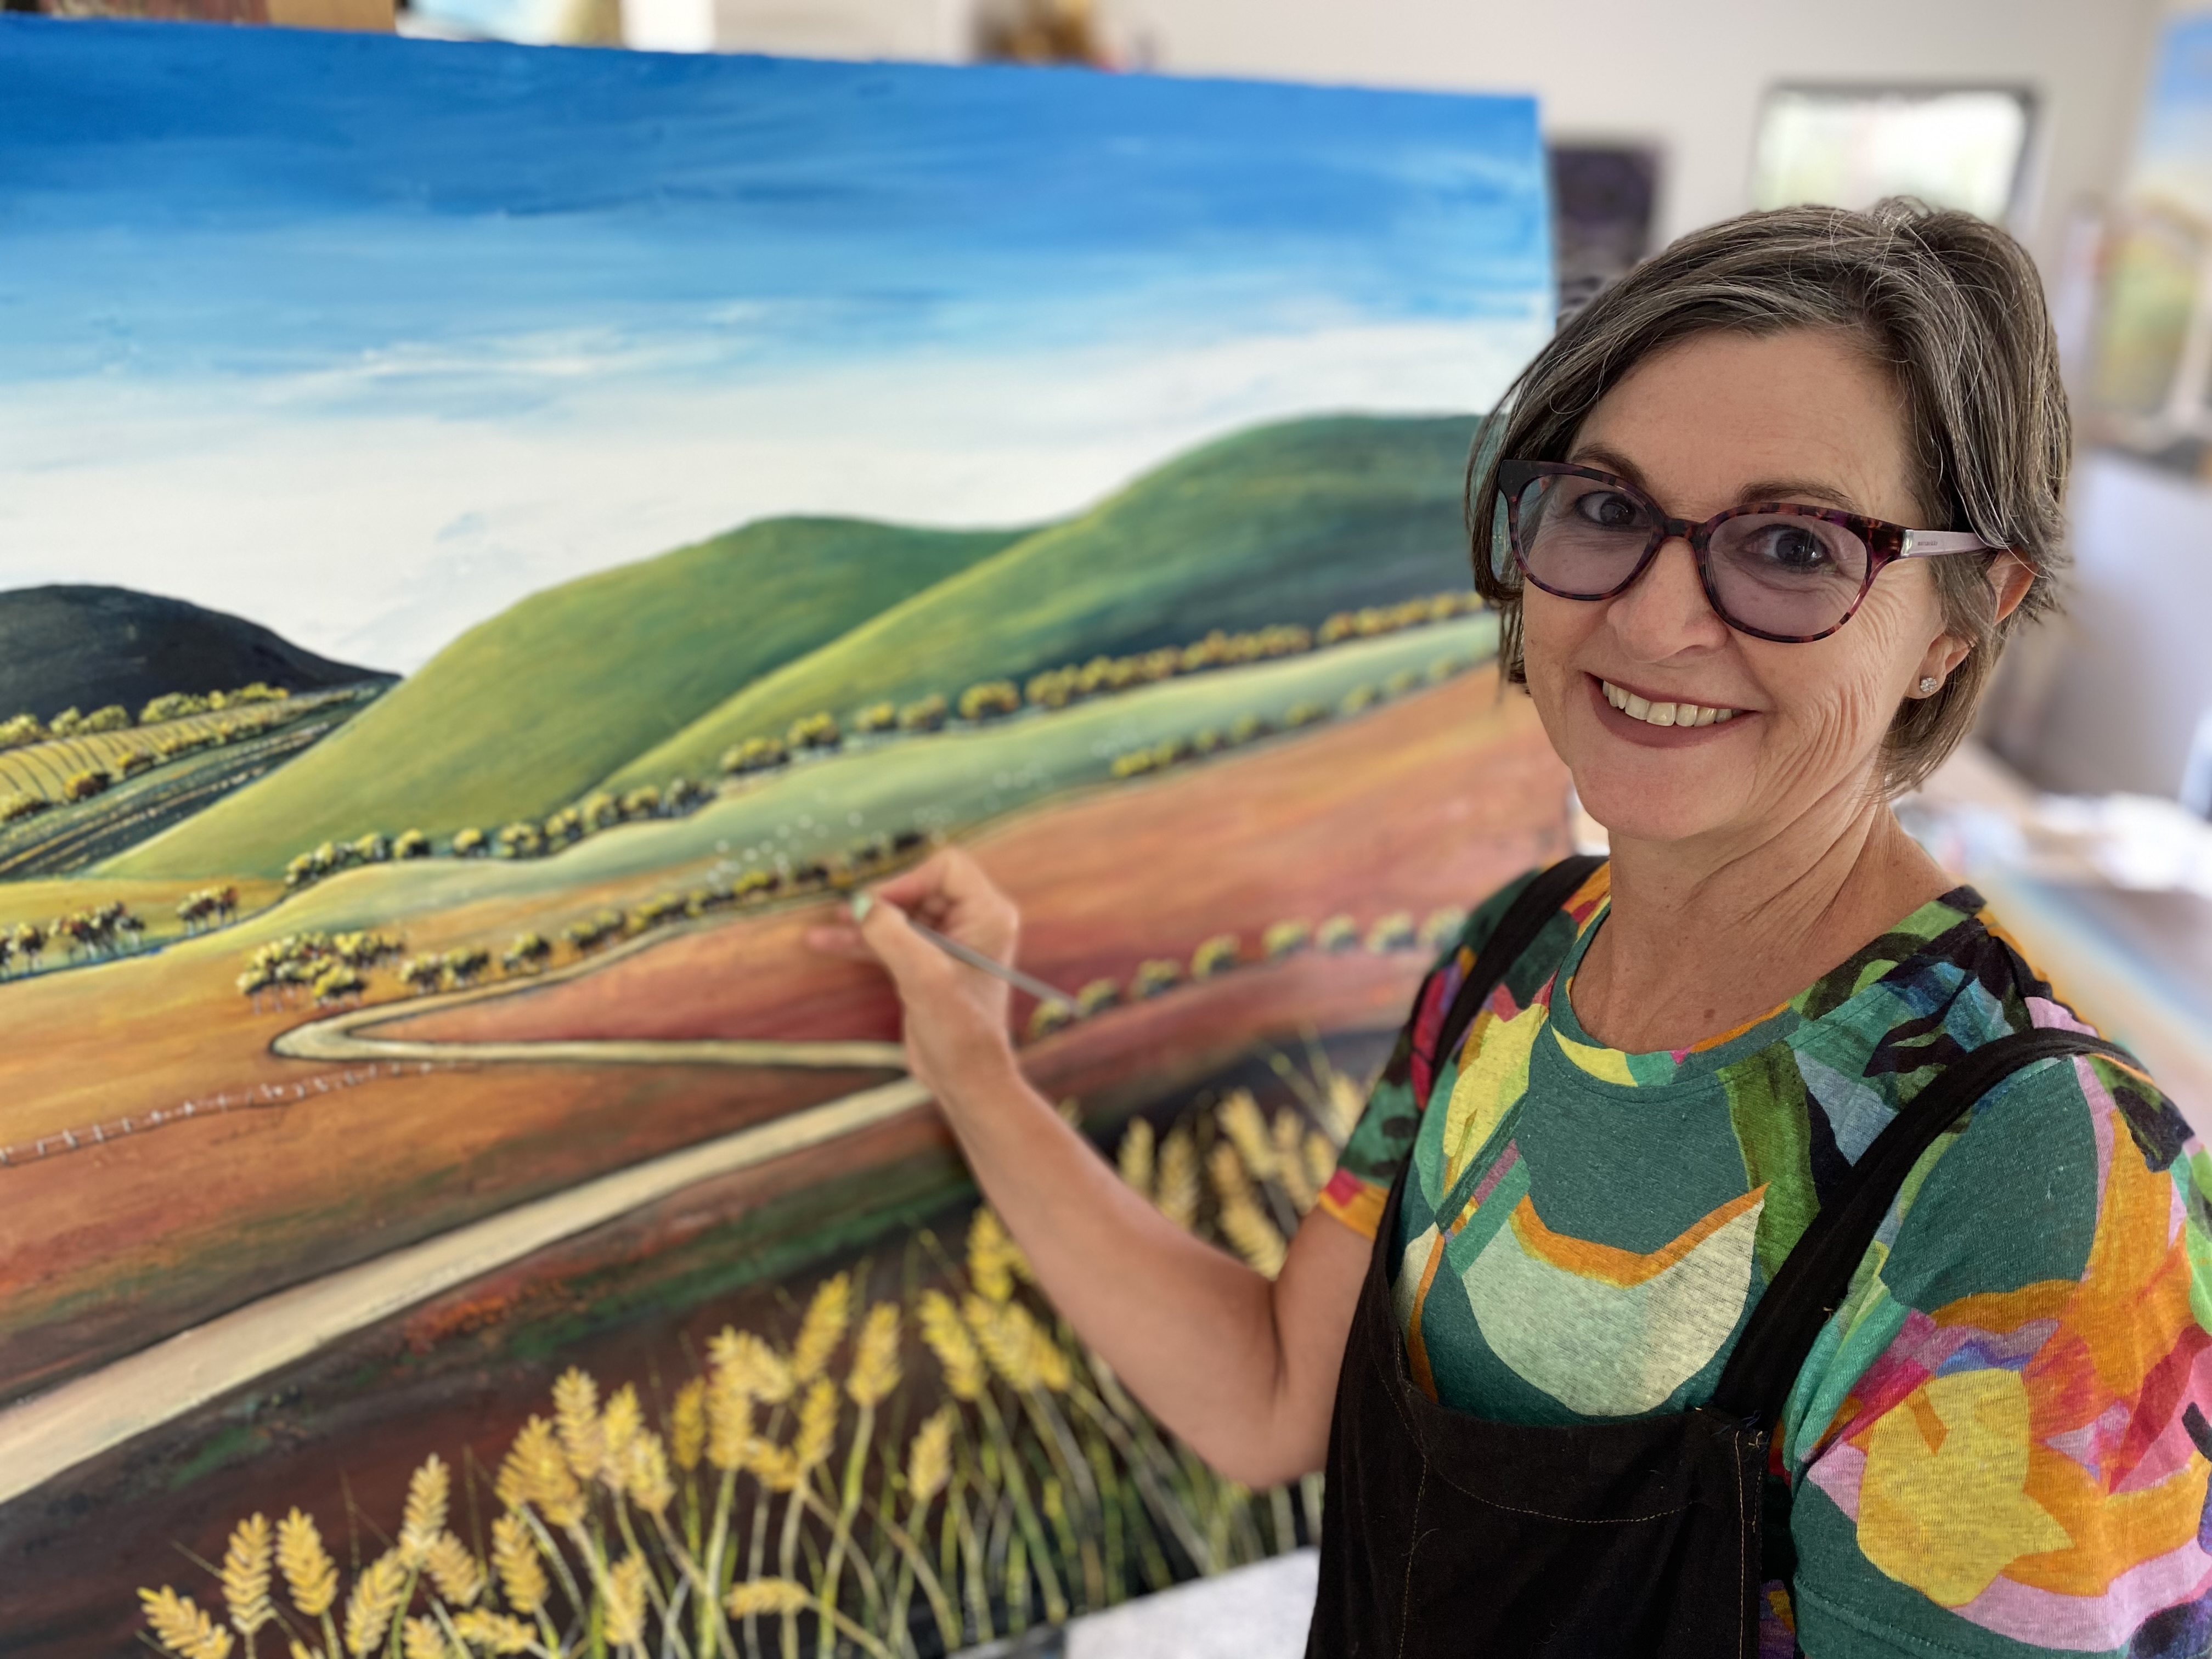 Corrie Young holds a paint brush next to one of her landscape paintings